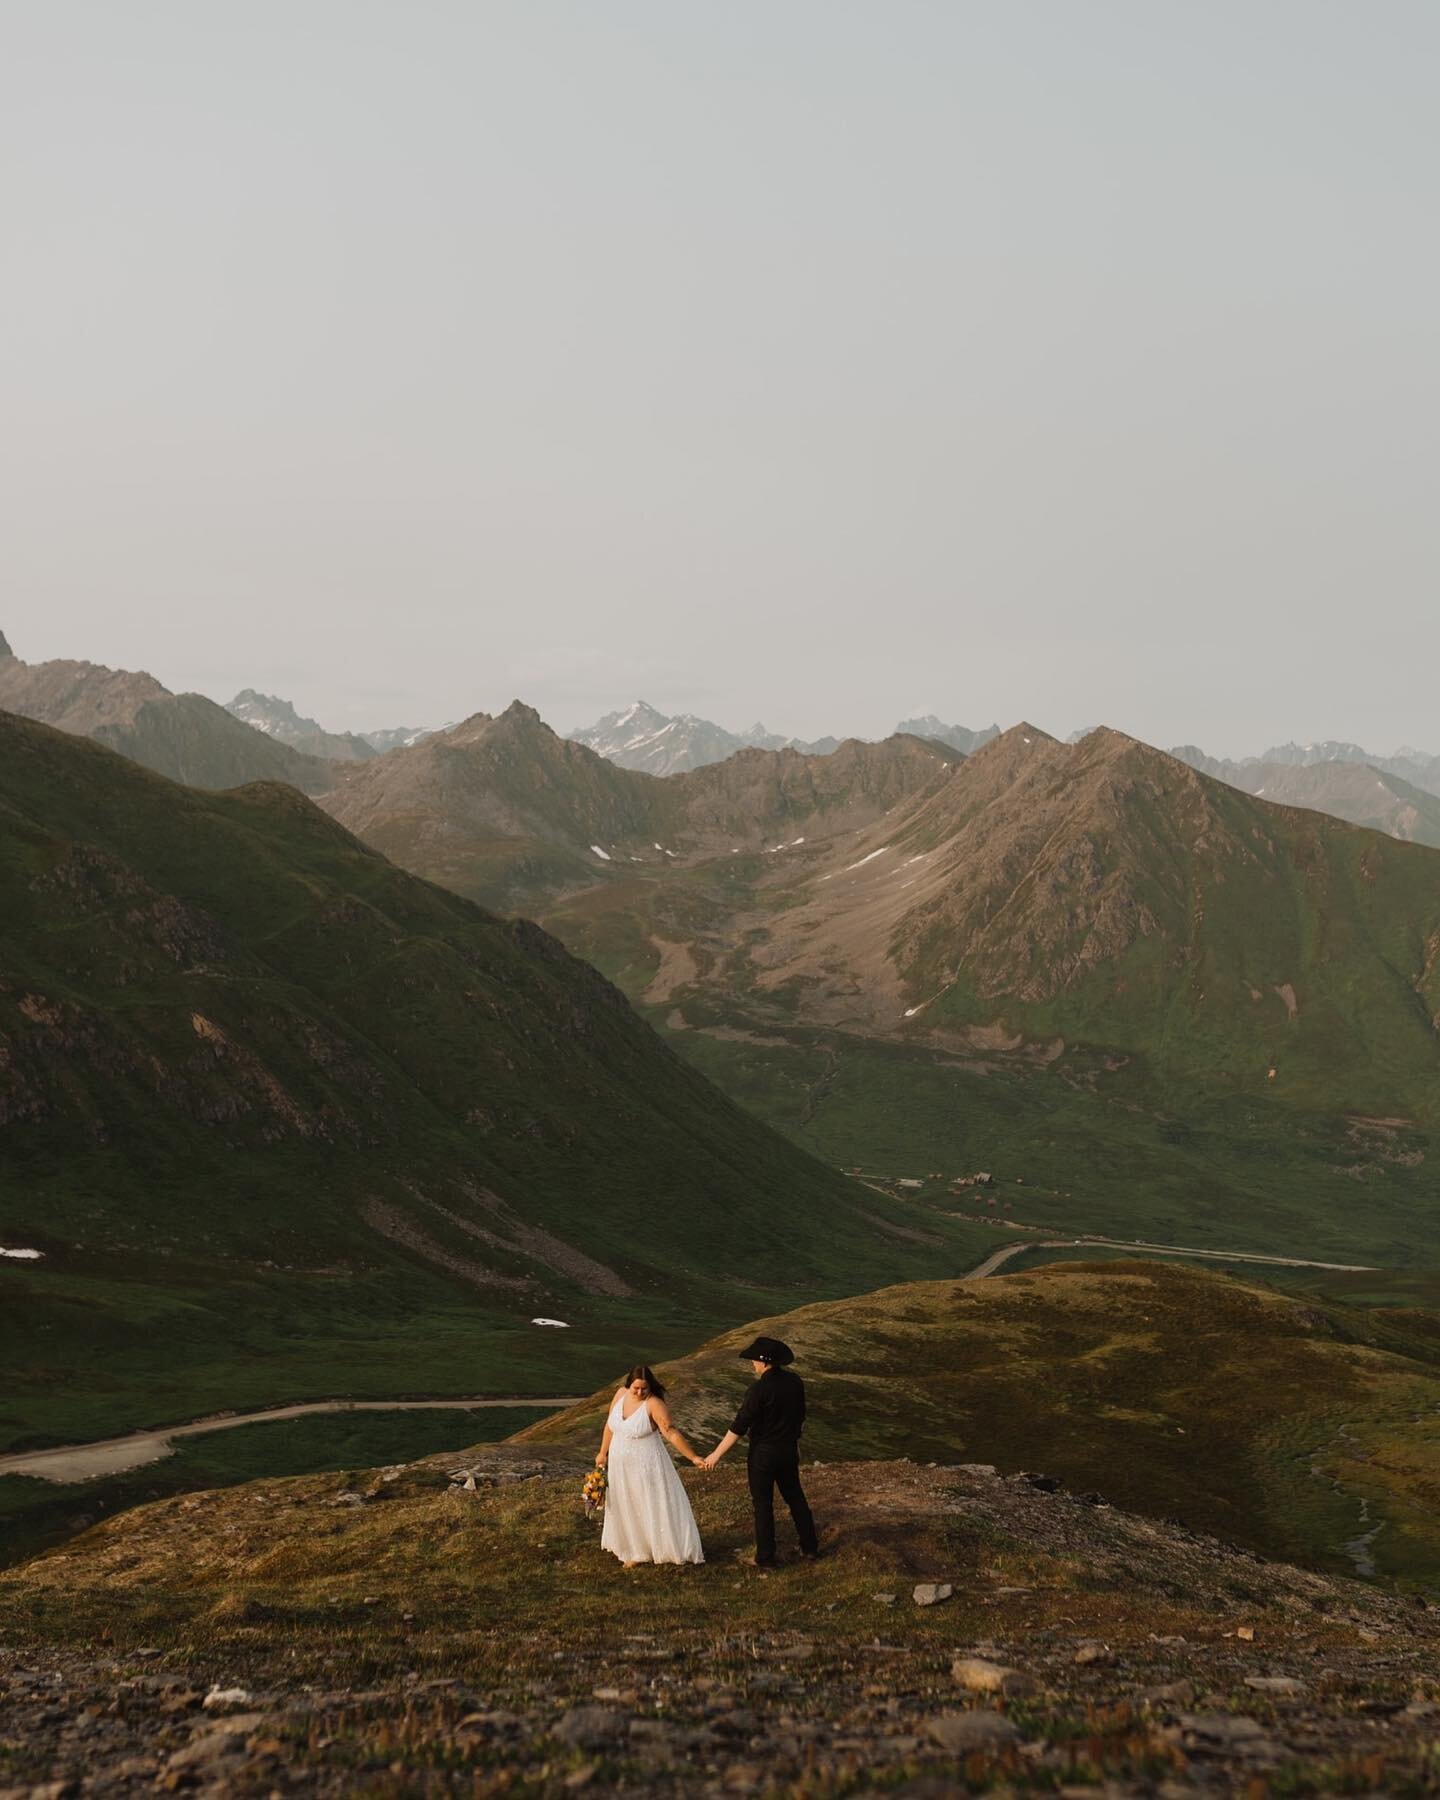 One year later, Megan &amp; Trevor got to have a proper &ldquo;I do&rdquo; in one if their favorite places. 

They happily hiked around in their wedding clothes, walked through streams &amp; said &ldquo;holy crap this is so beautiful&rdquo; way more 